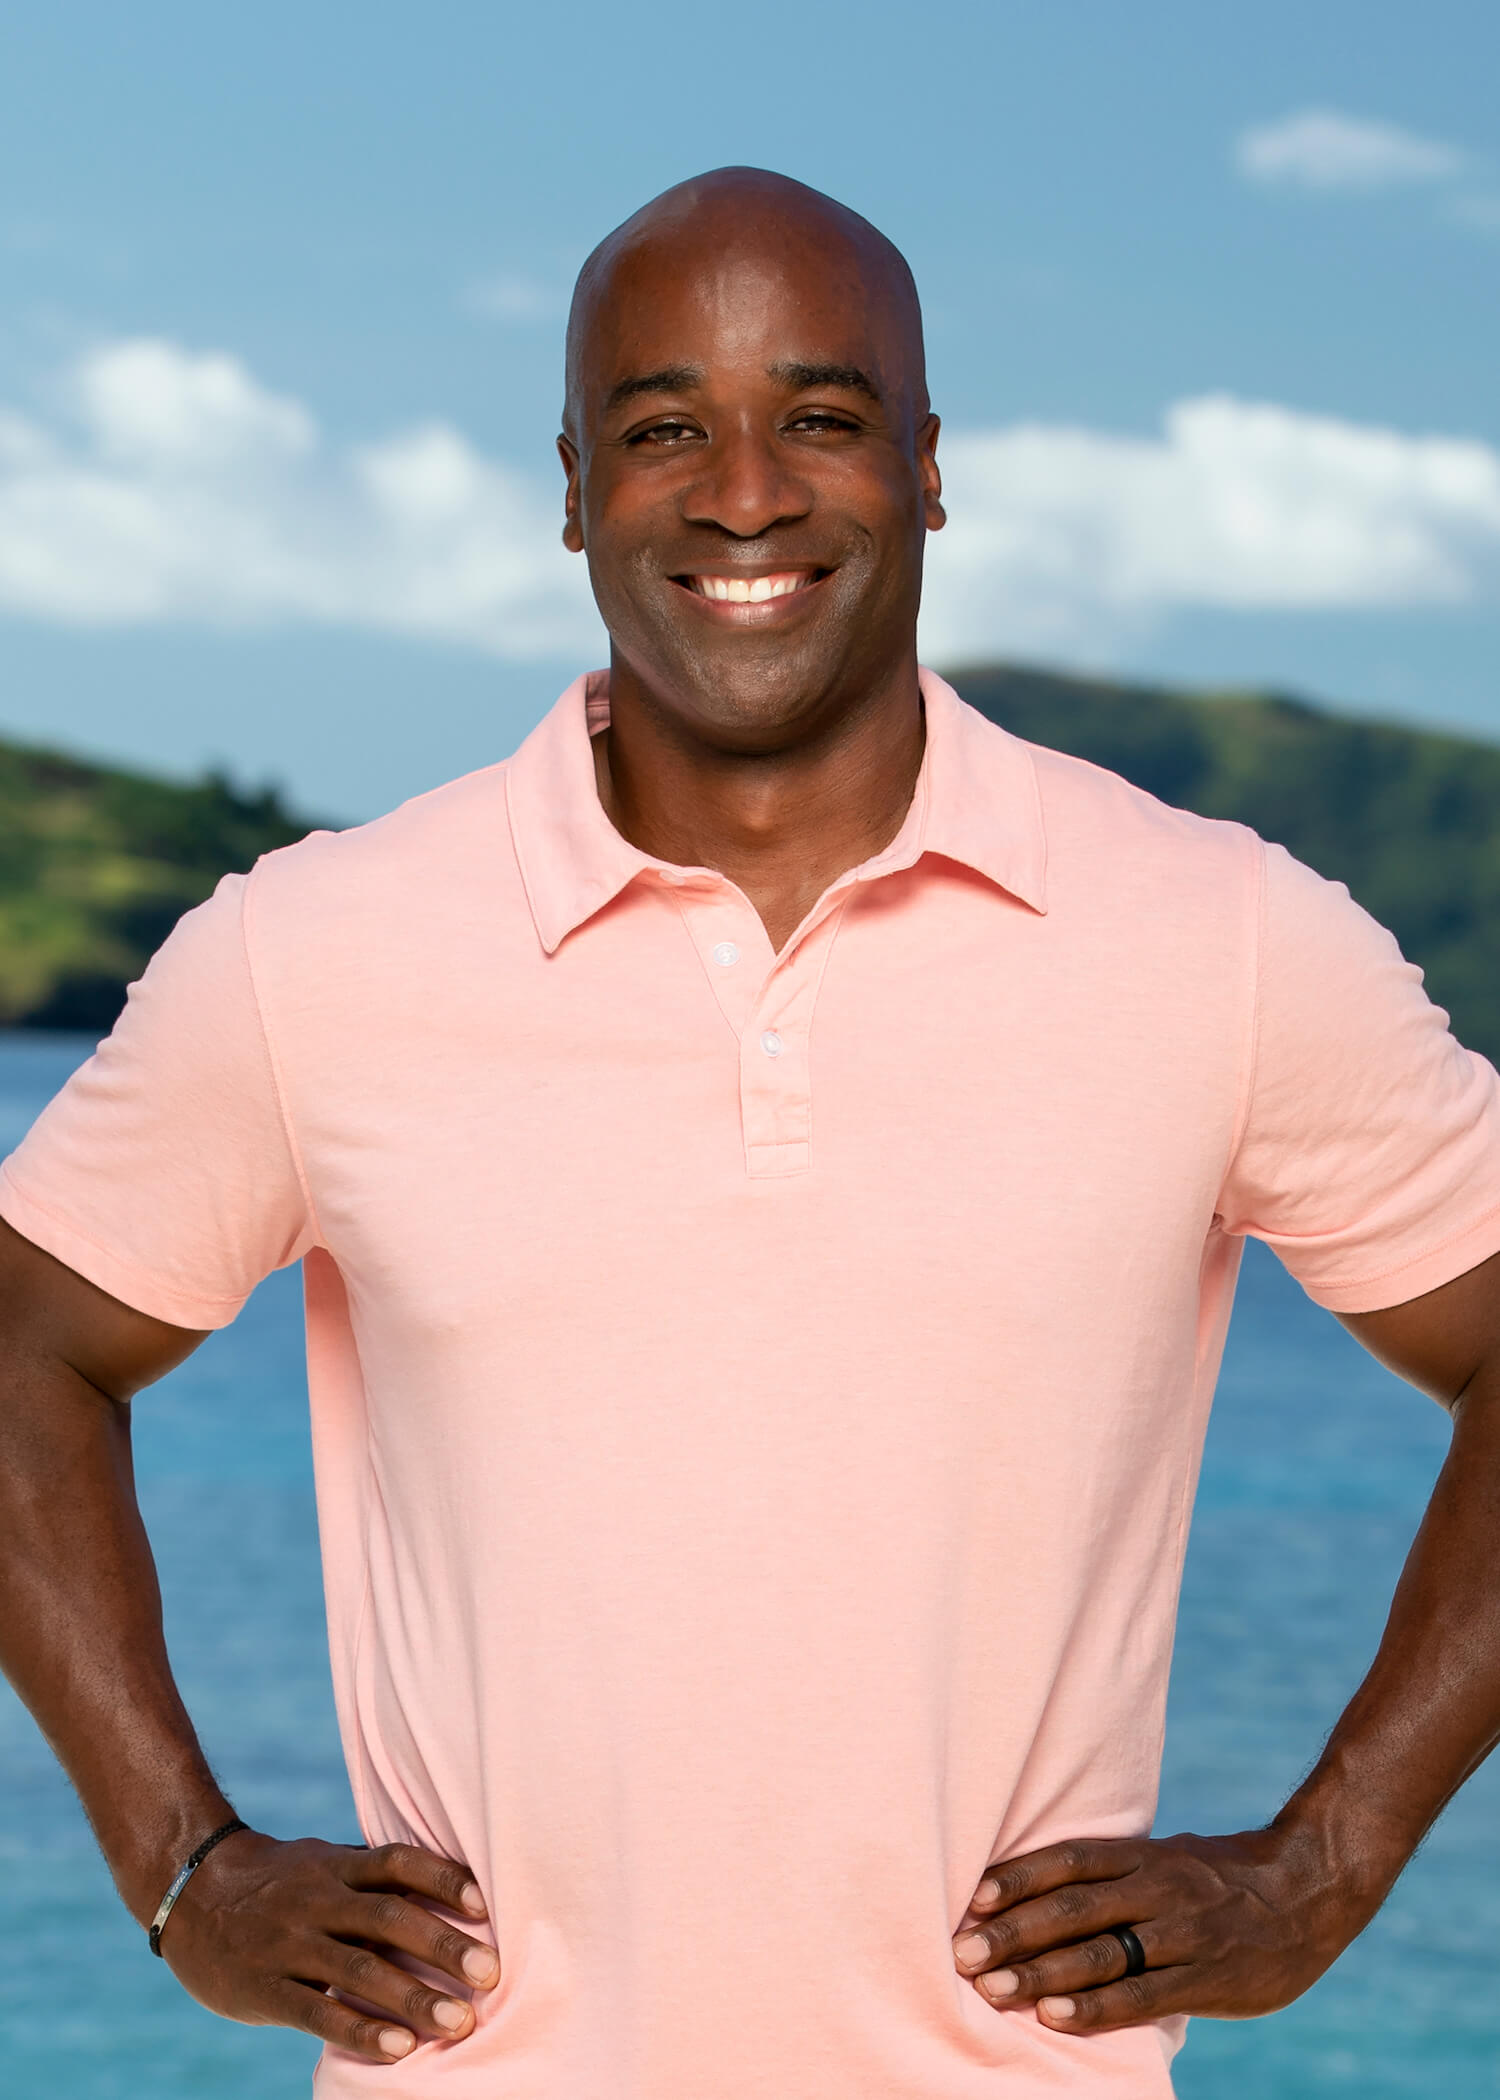 'Survivor 45' cast member Bruce Perreault smiling with his hands on his hips